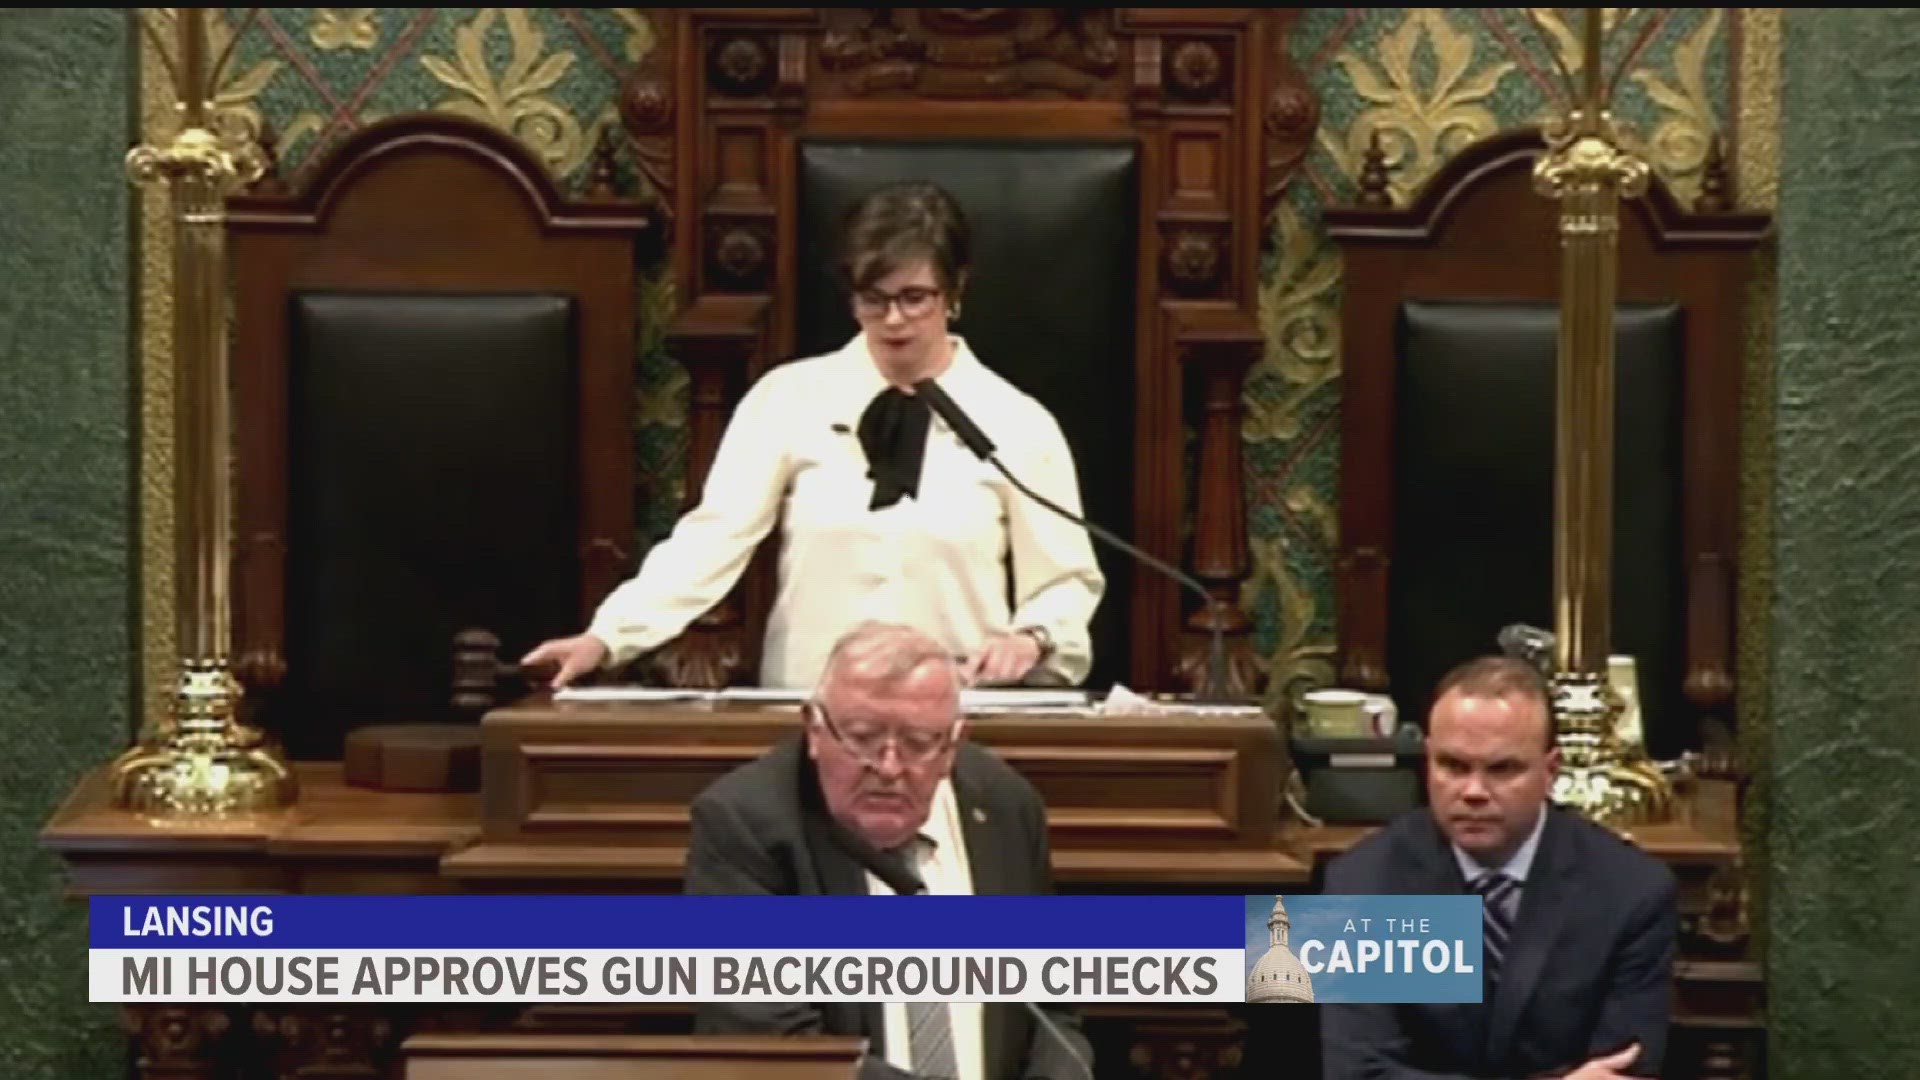 While there are already federal background checks, this bill aimed to expand background checks to include all firearms bought in Michigan.